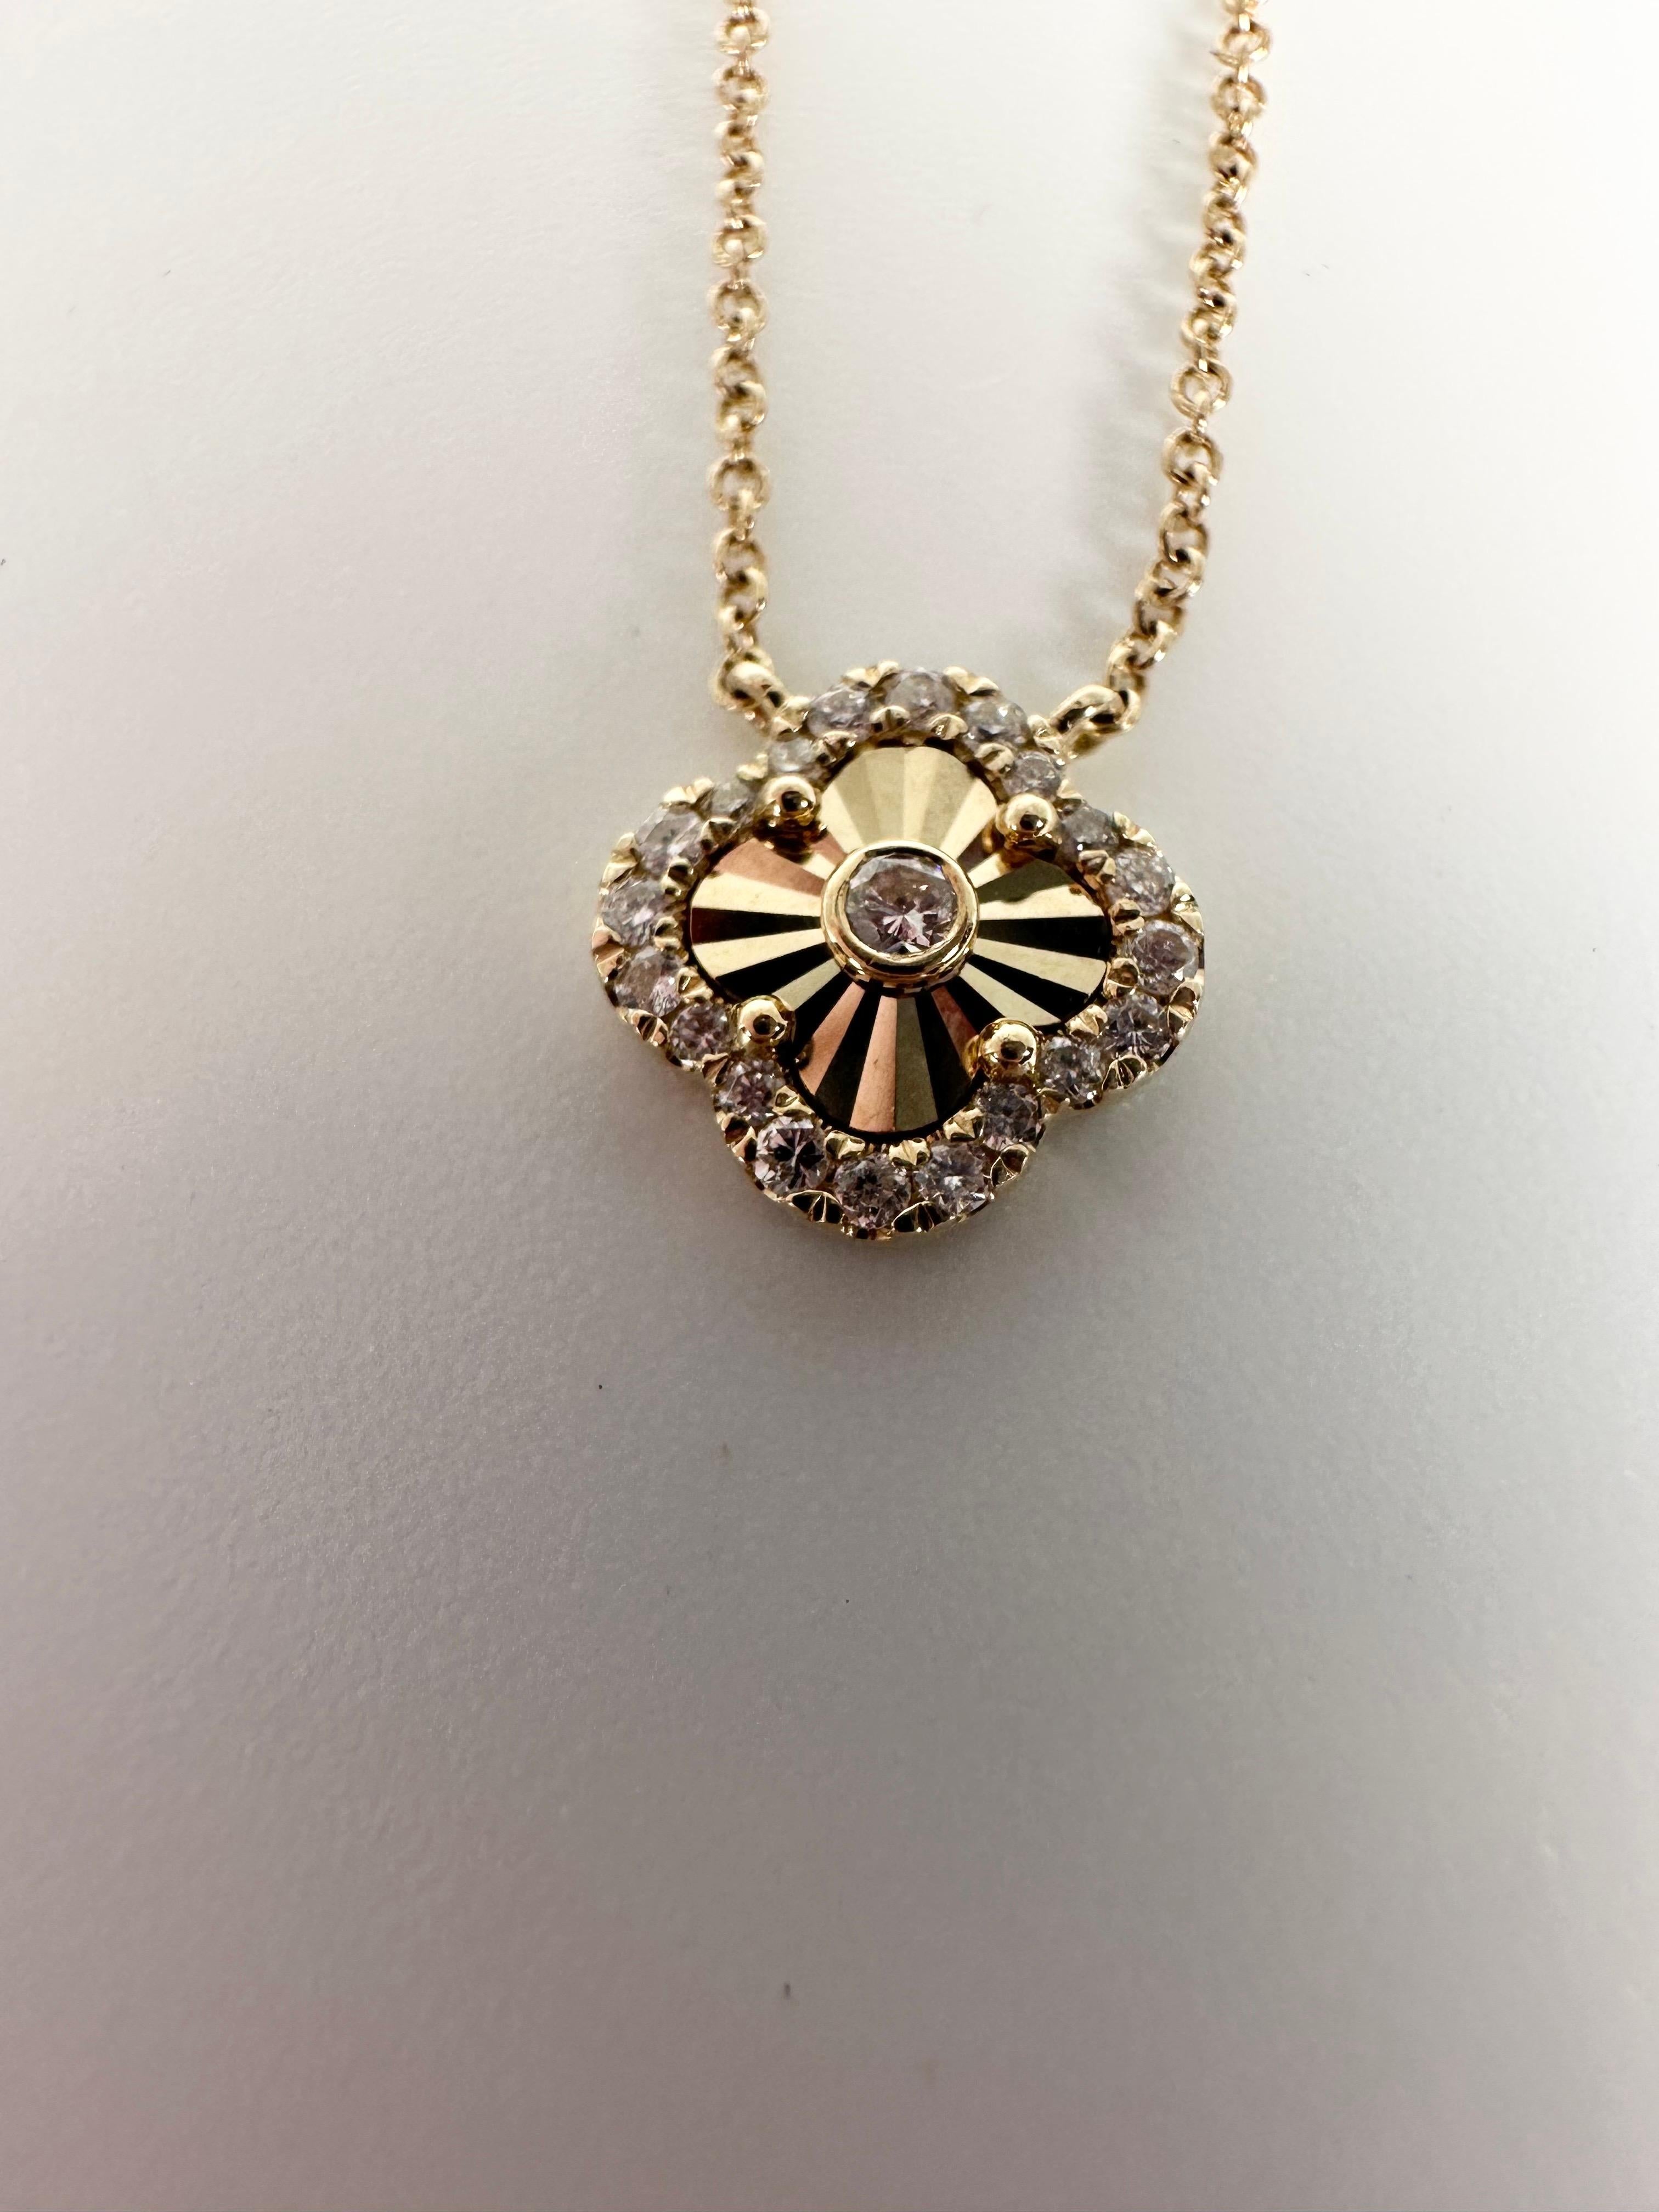 Clover diamond necklace 14KT gold lucky diamond necklace In New Condition For Sale In Jupiter, FL